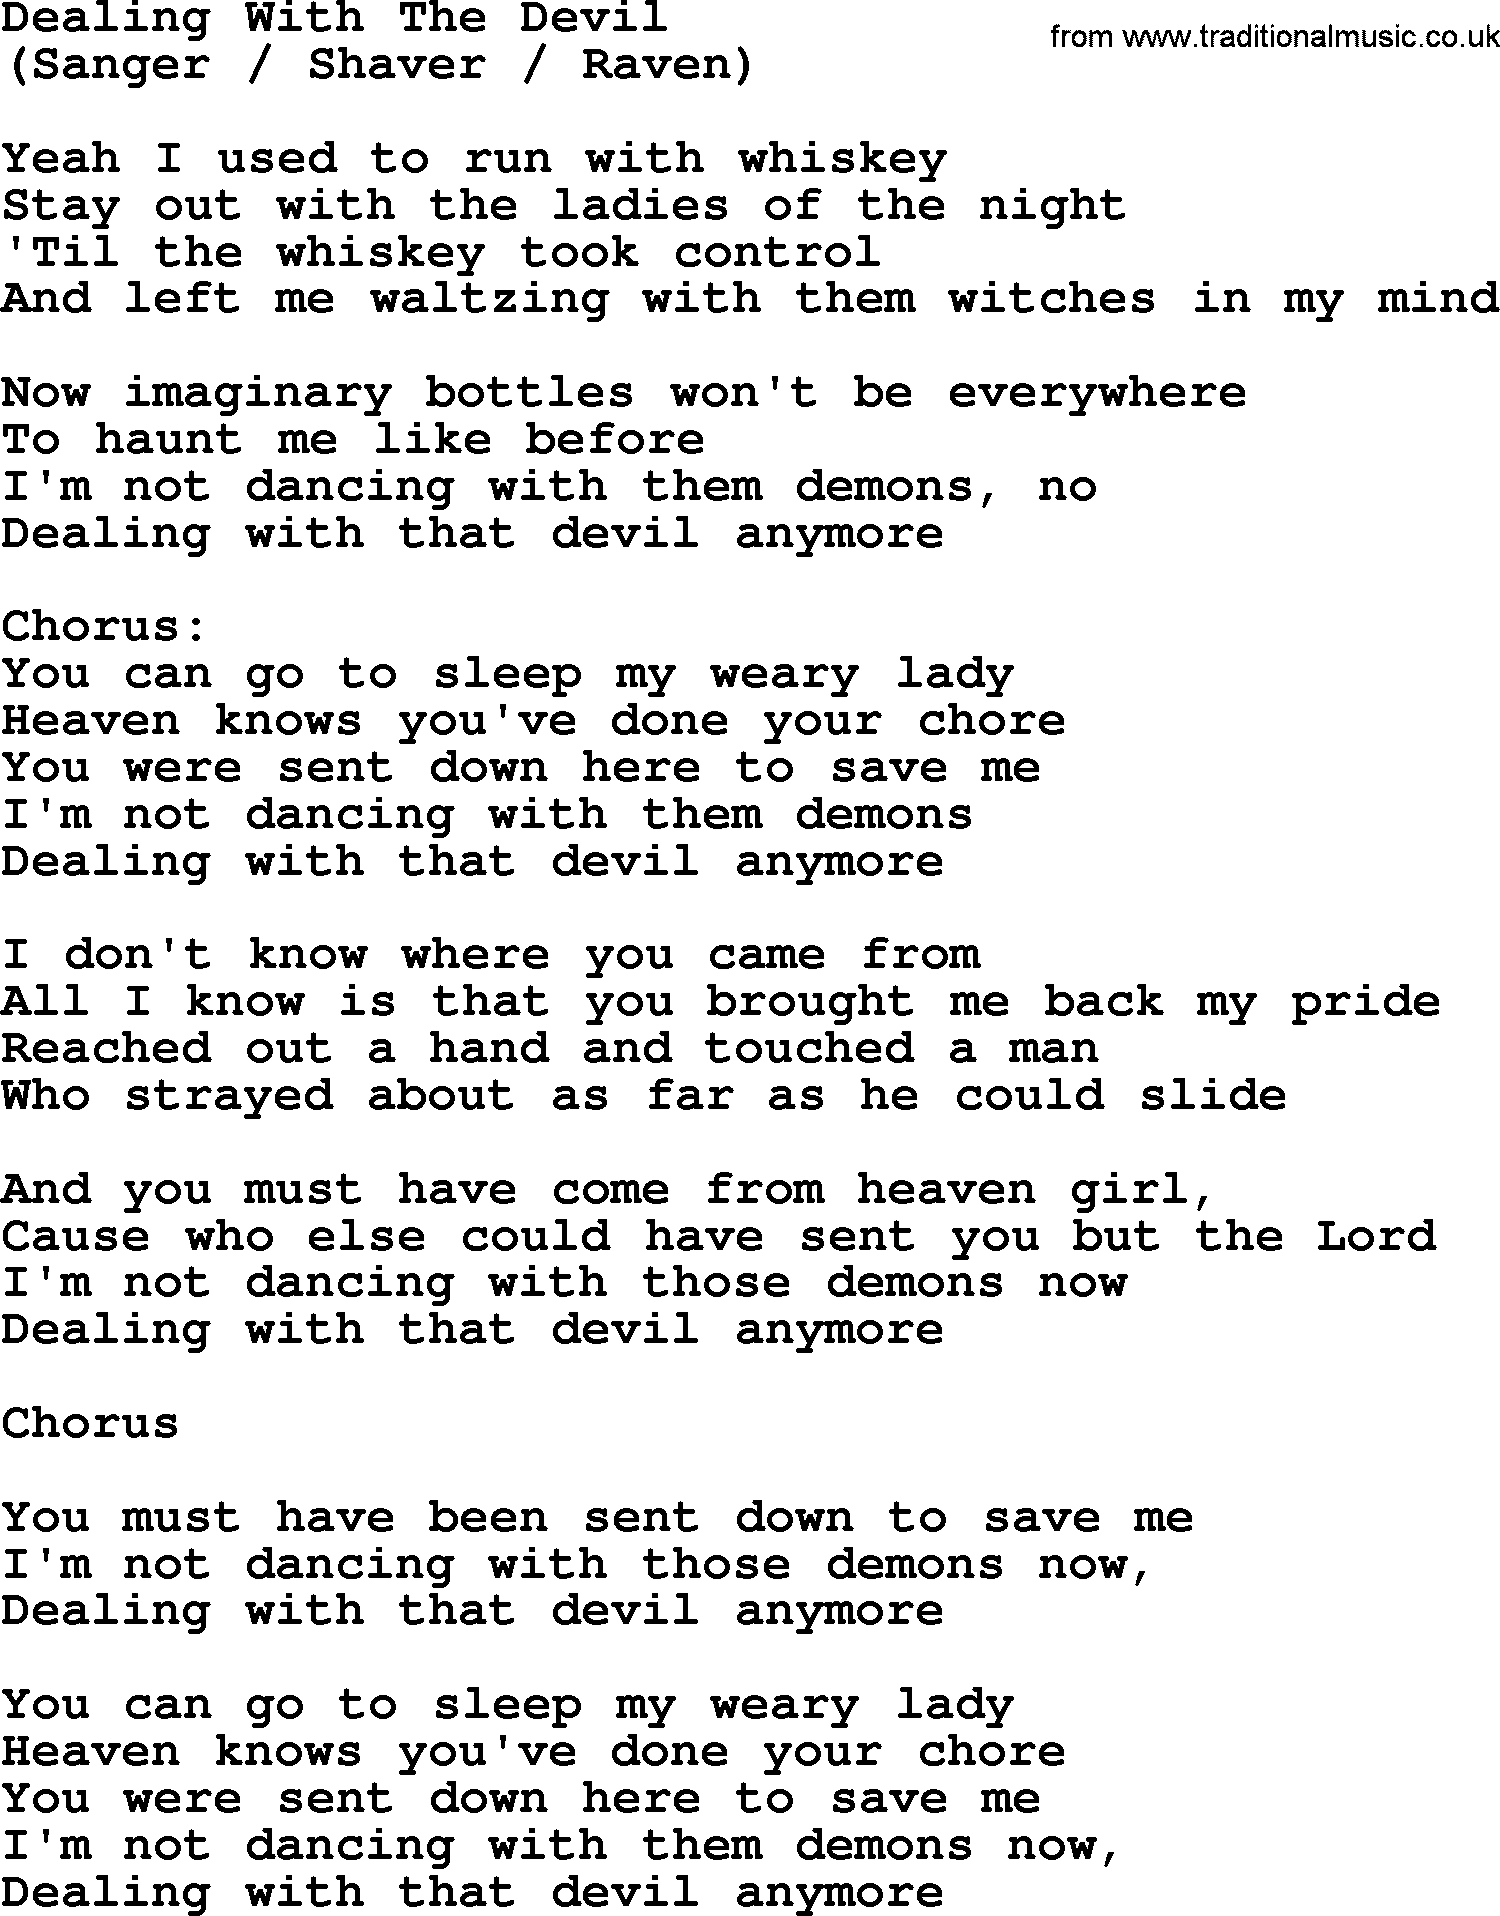 The Byrds song Dealing With The Devil, lyrics